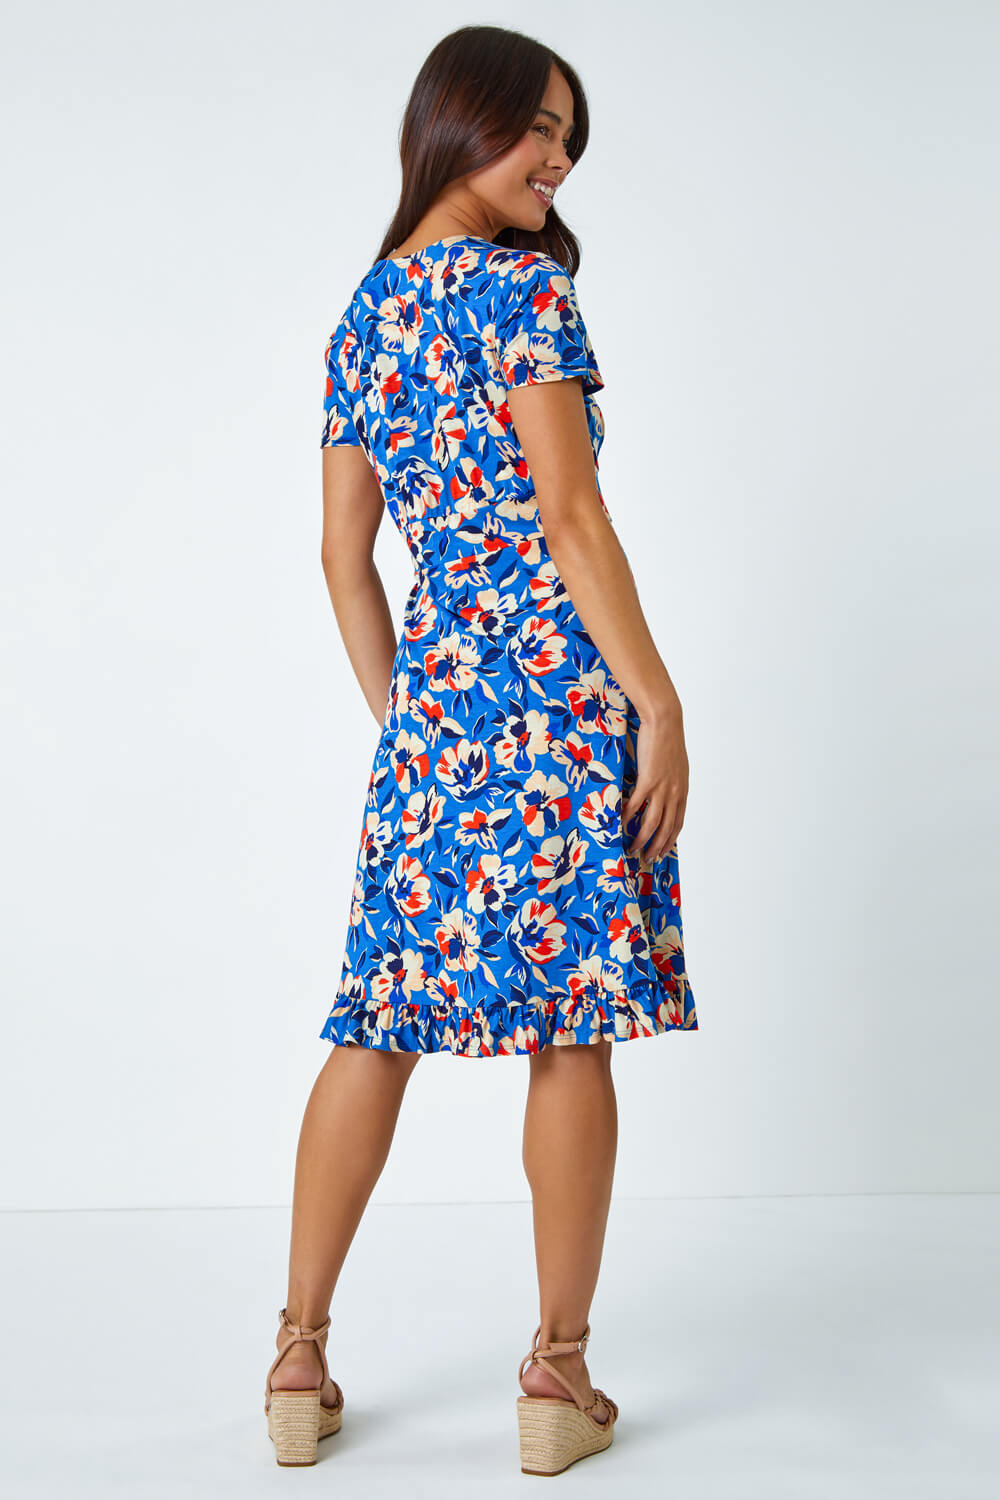 Turquoise Petite Floral Frill Hem Stretch Dress, Image 3 of 5